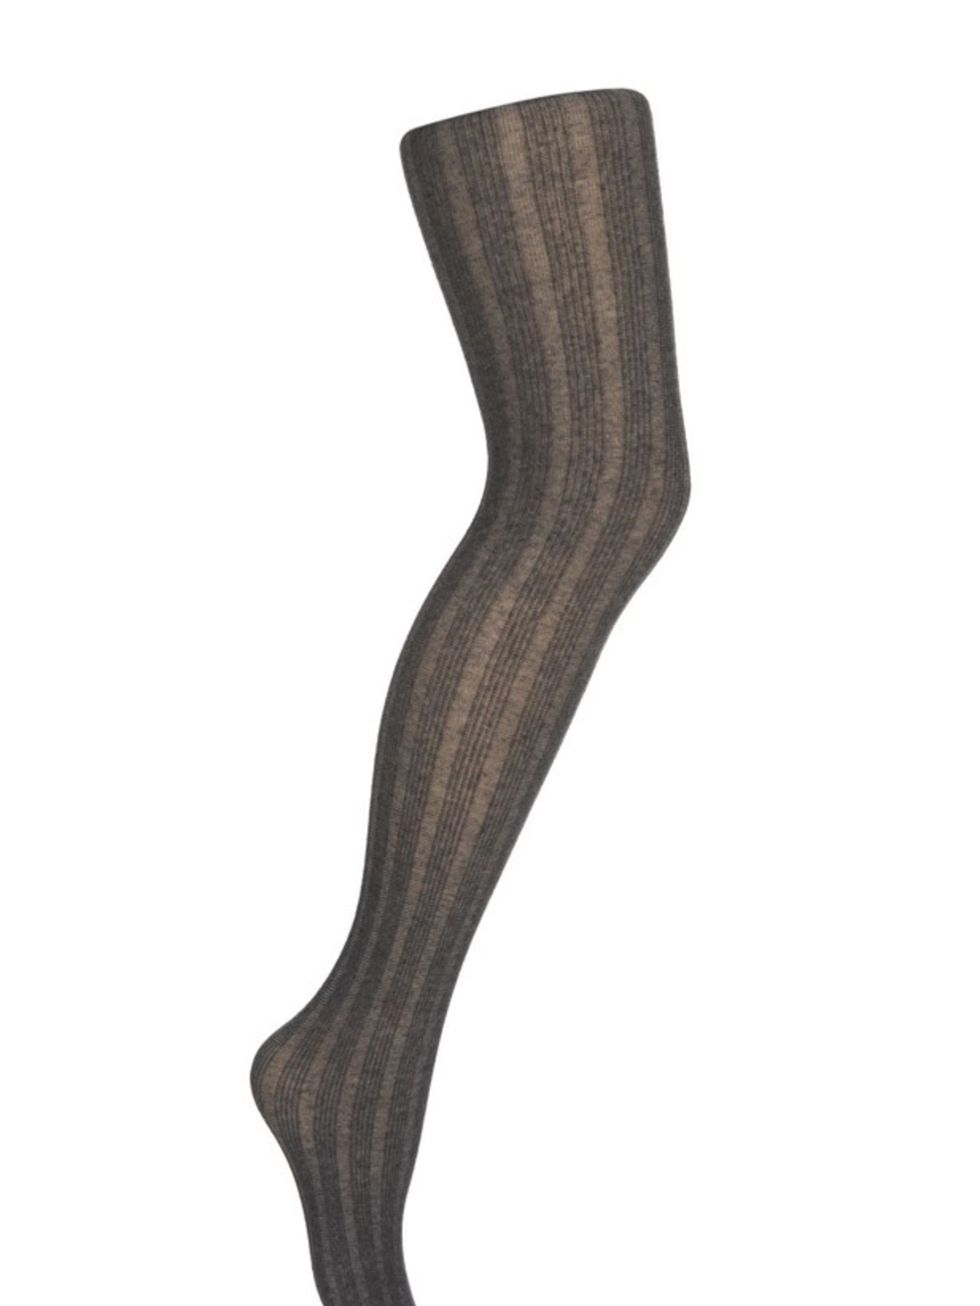 <p>Ribbed grey tights, £10, by Warehouse at <a href="http://www.houseoffraser.co.uk/Warehouse+Marl+ribbed+tights/131700286,default,pd.html">House of Fraser</a></p>